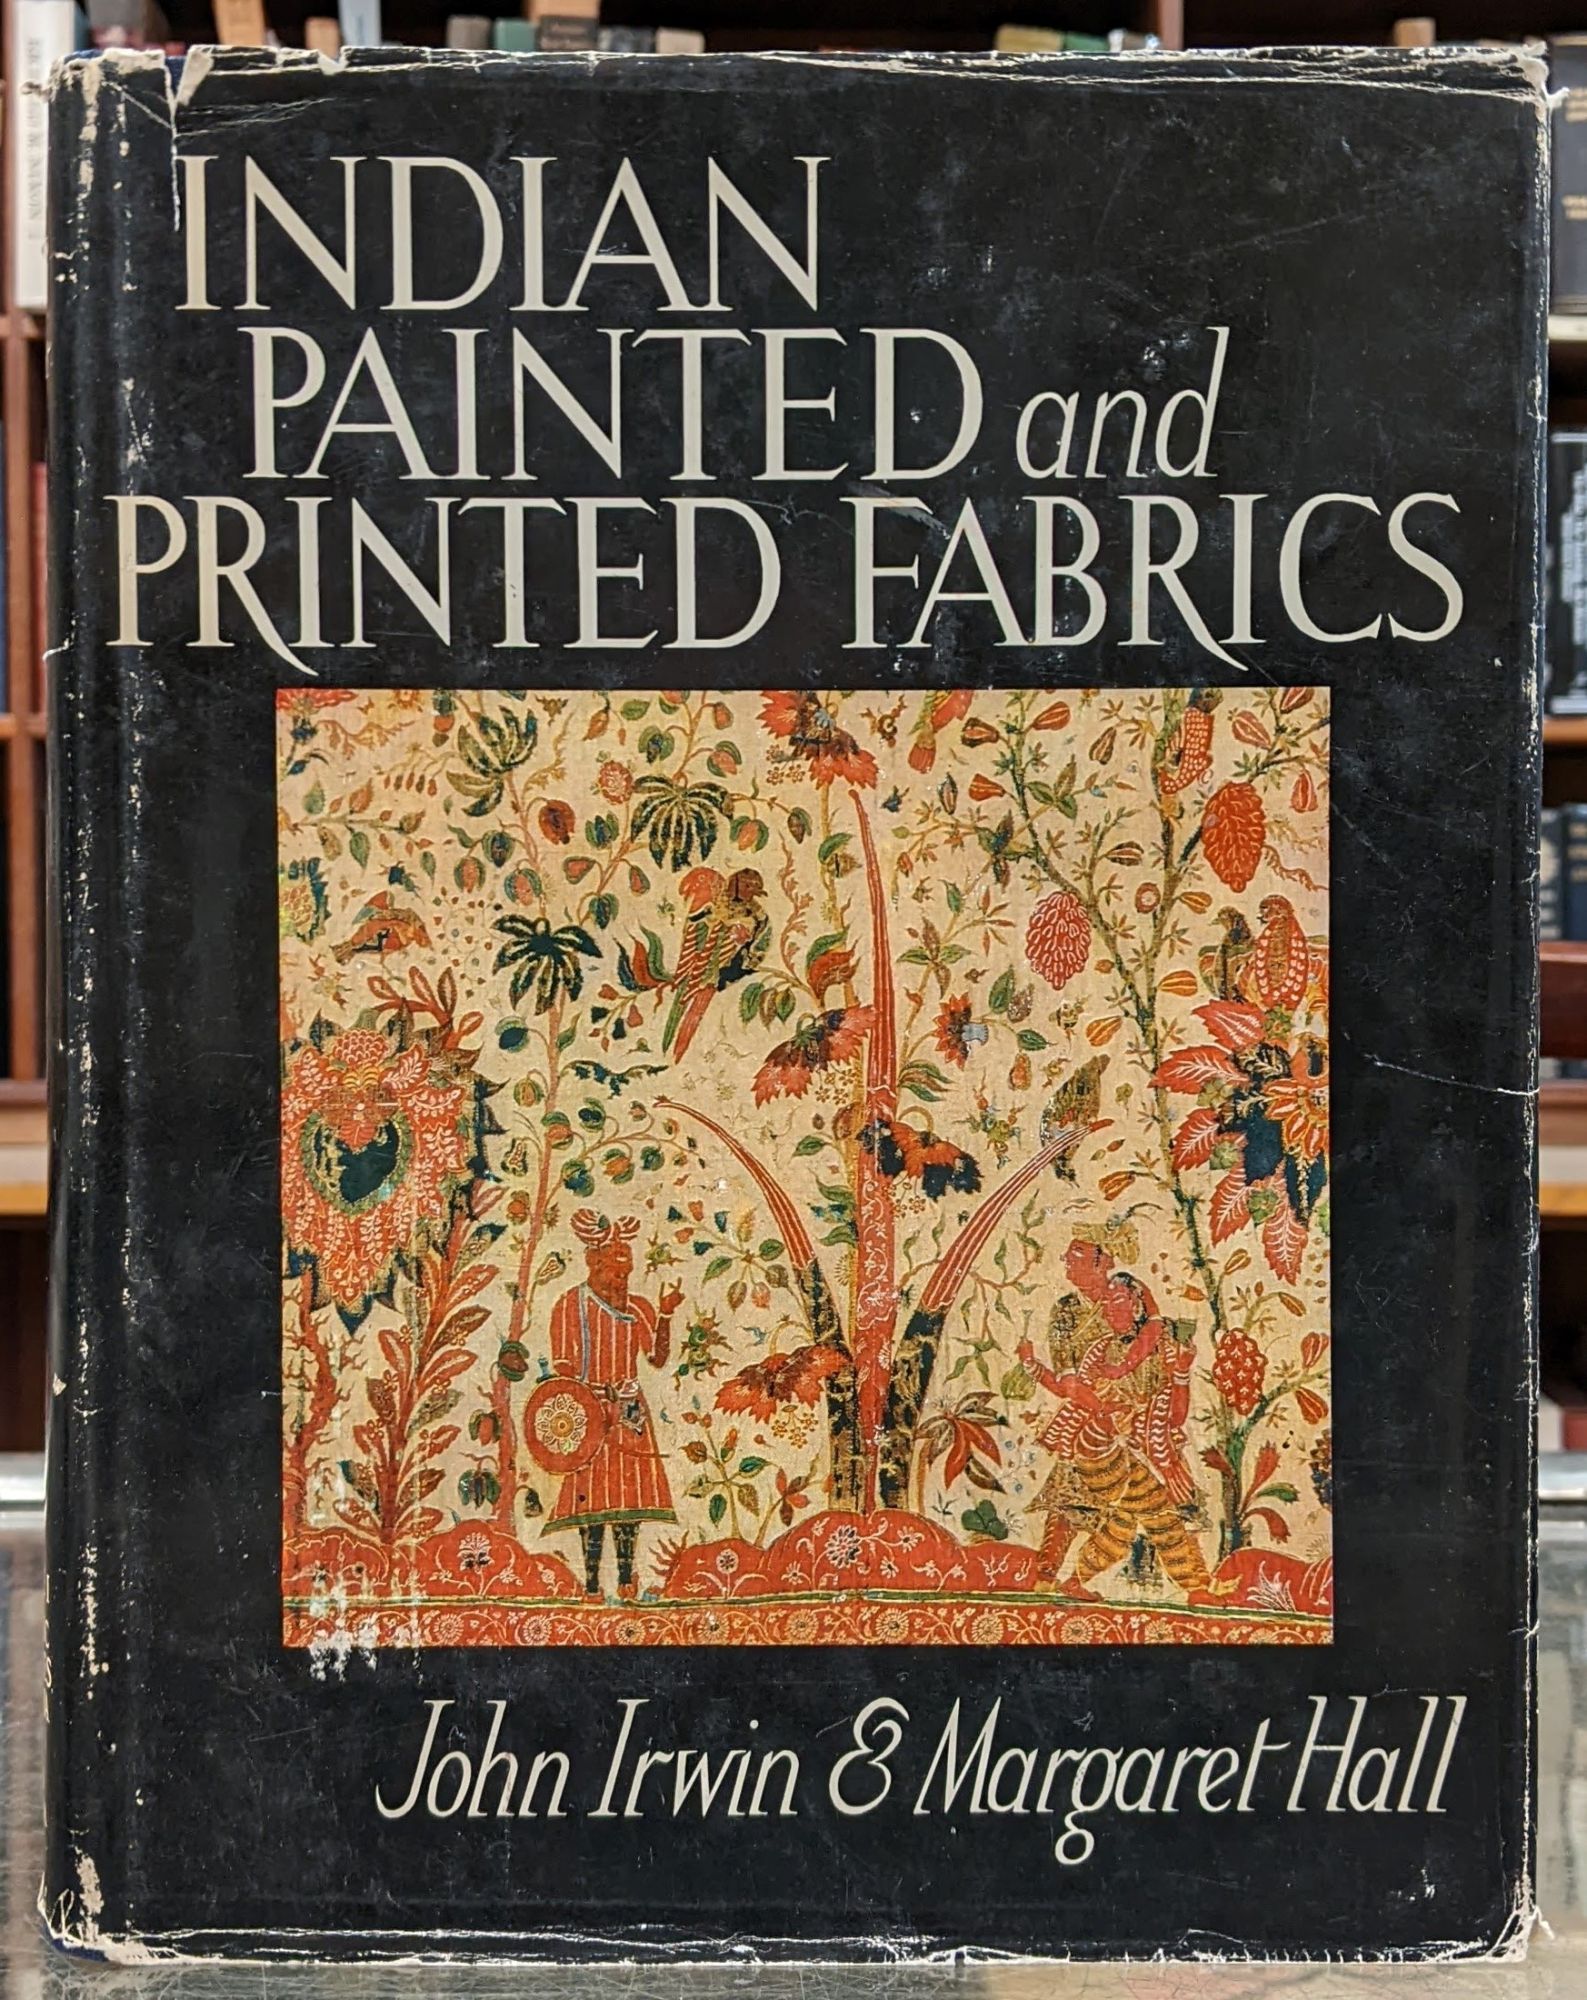 Arts and Crafts of India [Book]